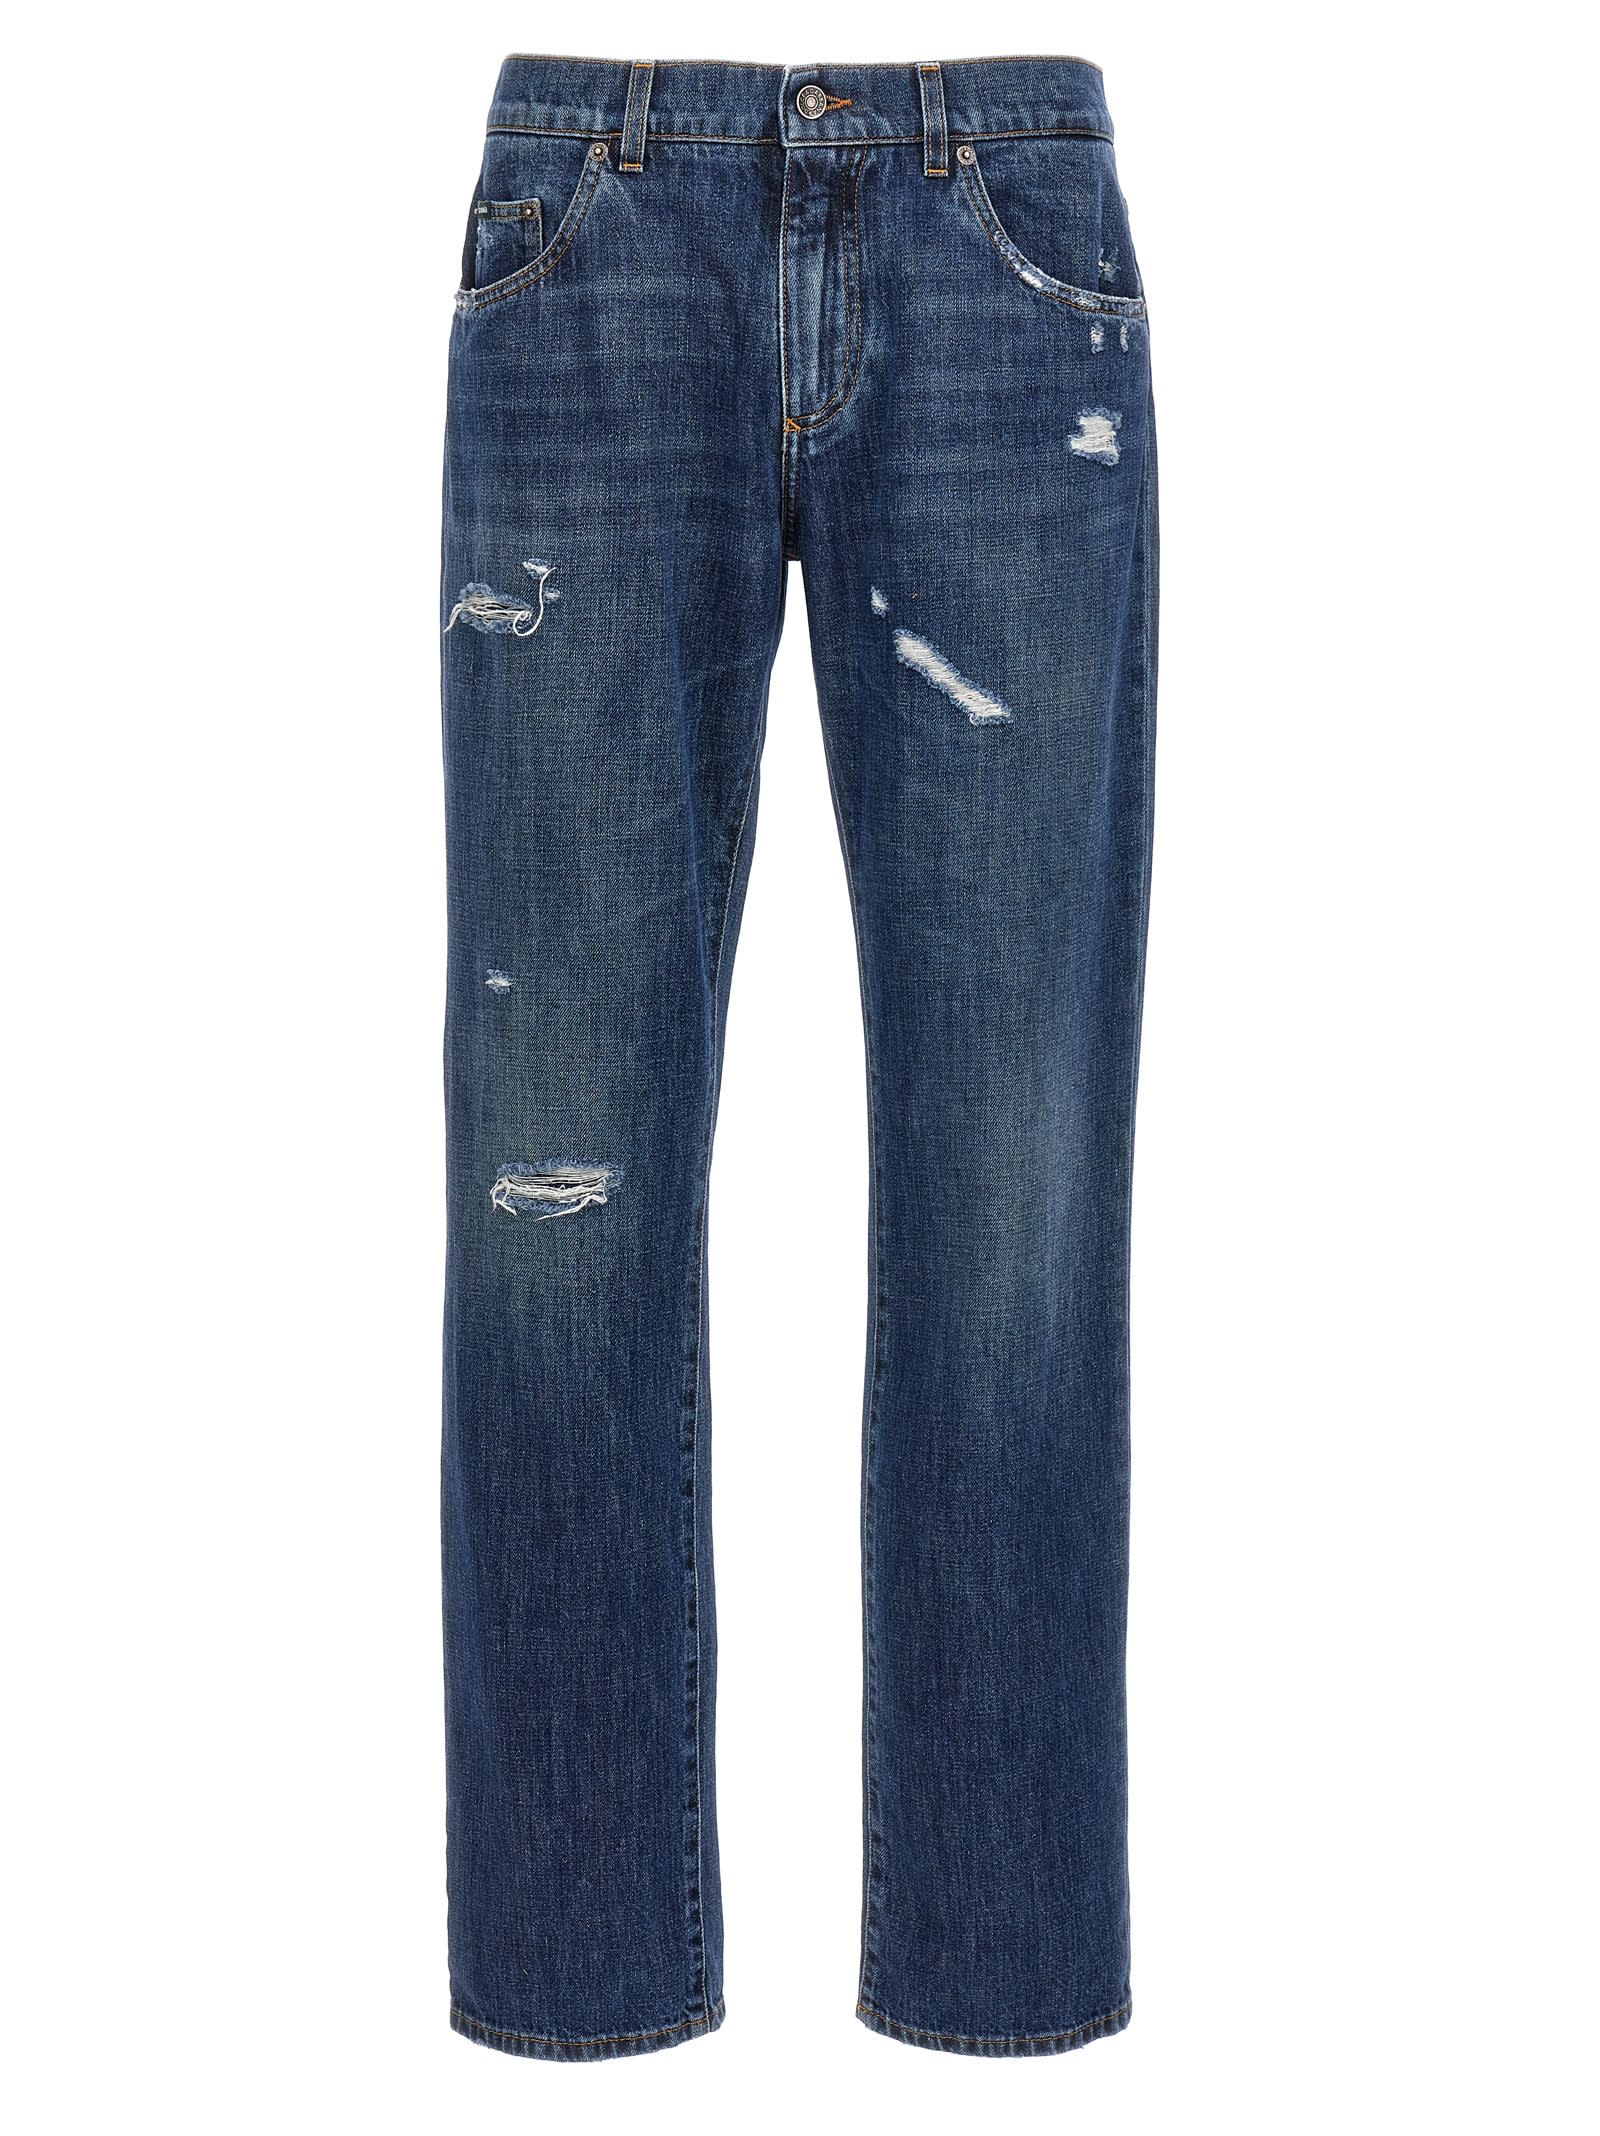 DOLCE & GABBANA USED EFFECT JEANS